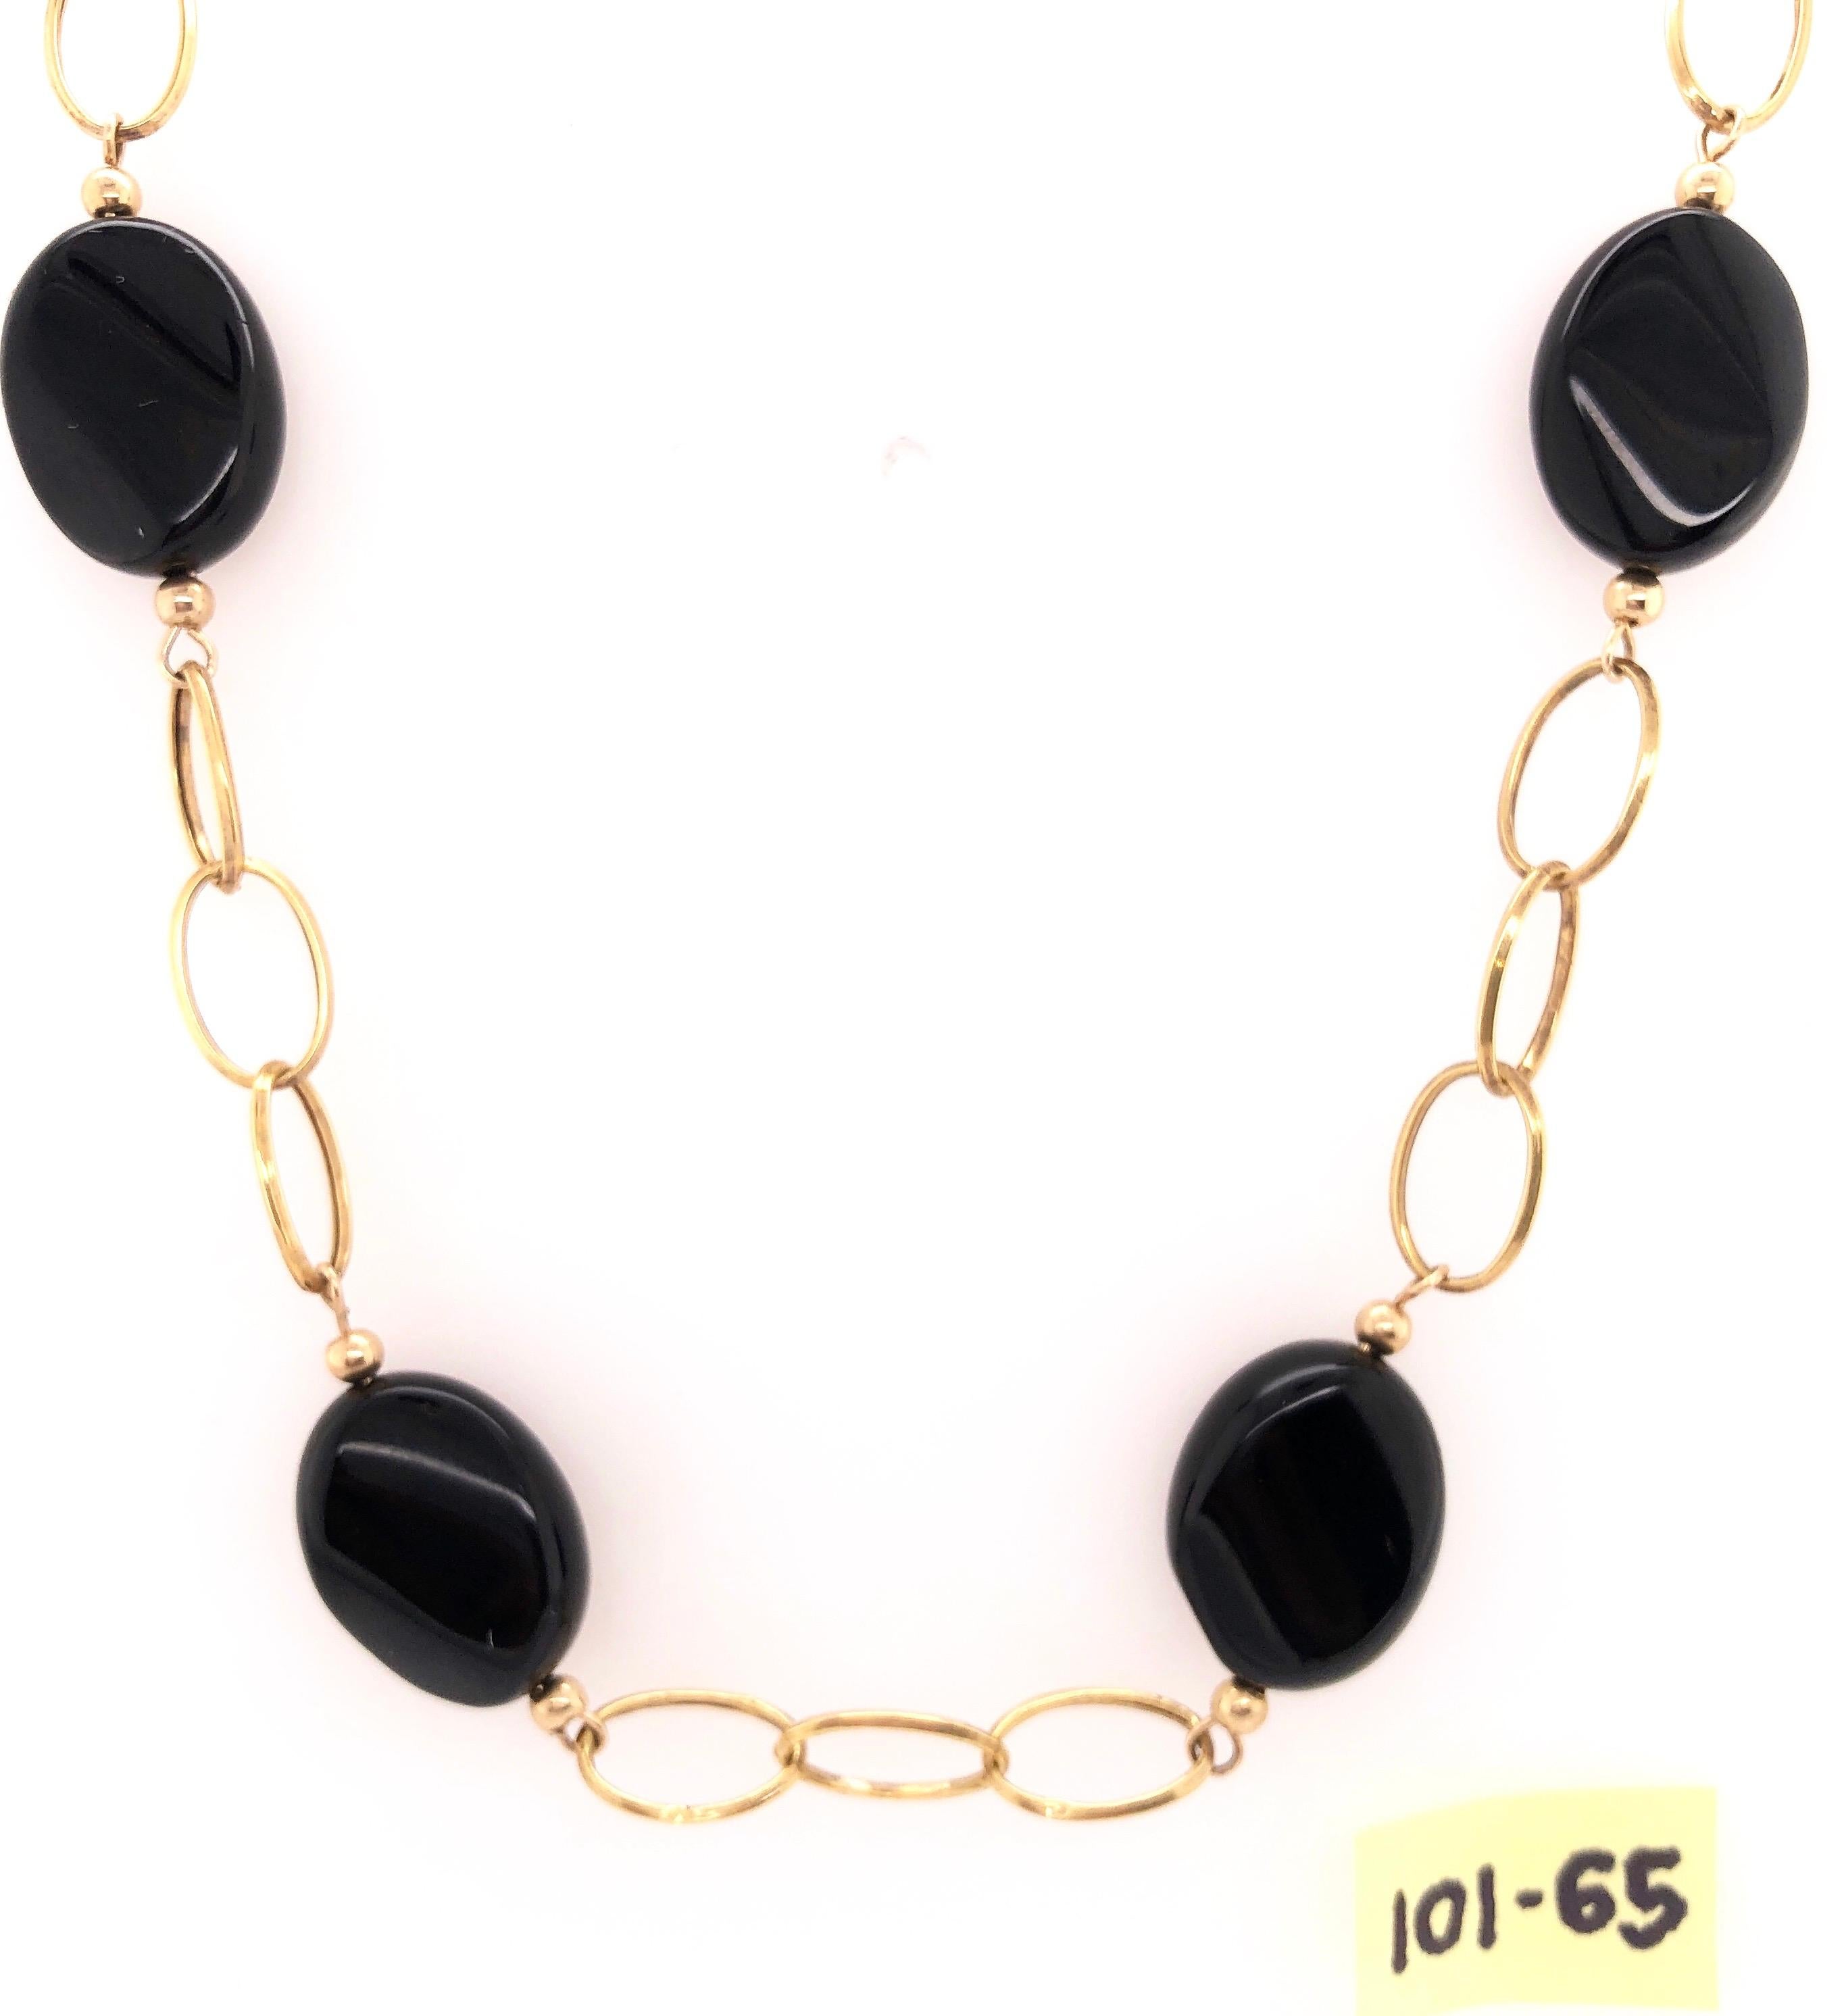 14 Karat Yellow Gold Link Necklace with Ebony Stones 21.2 Grams Total For Sale 8